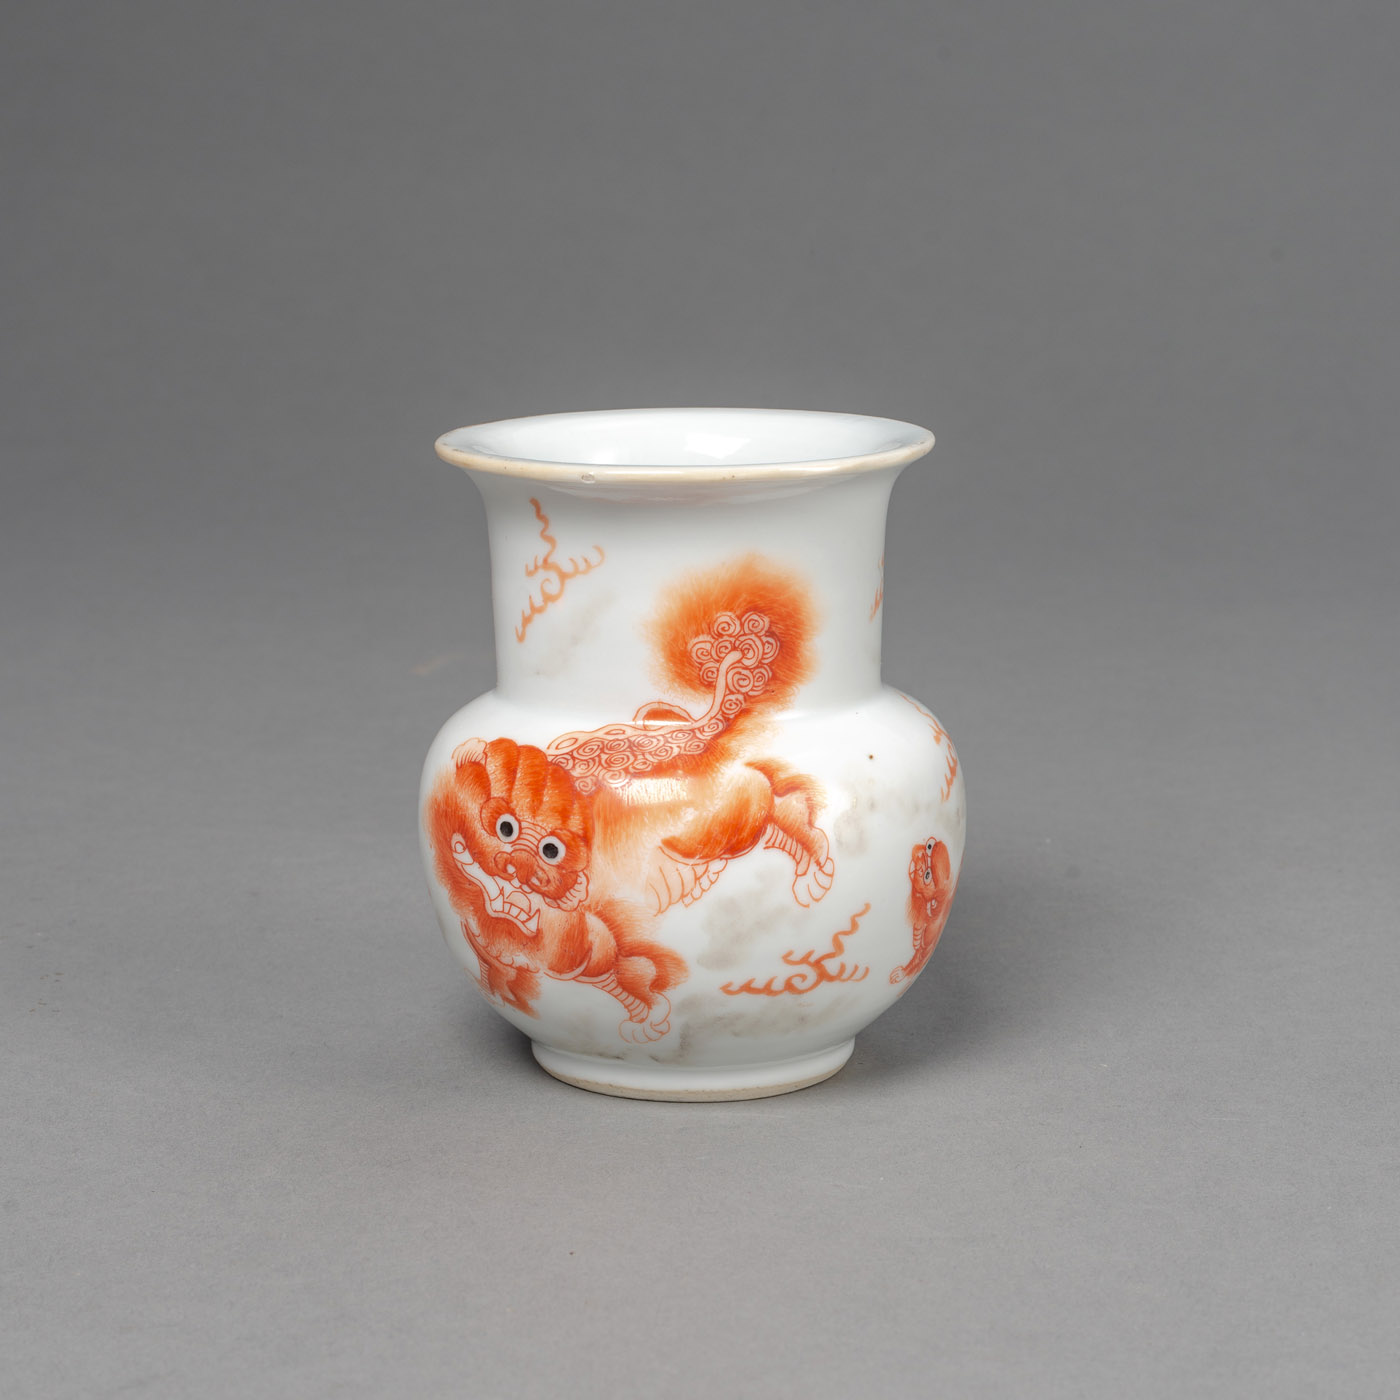 <b>A SMALL INSCRIBED IRON-RED FO-LION PORCELAIN SPITTOON 'ZHADOU'</b>